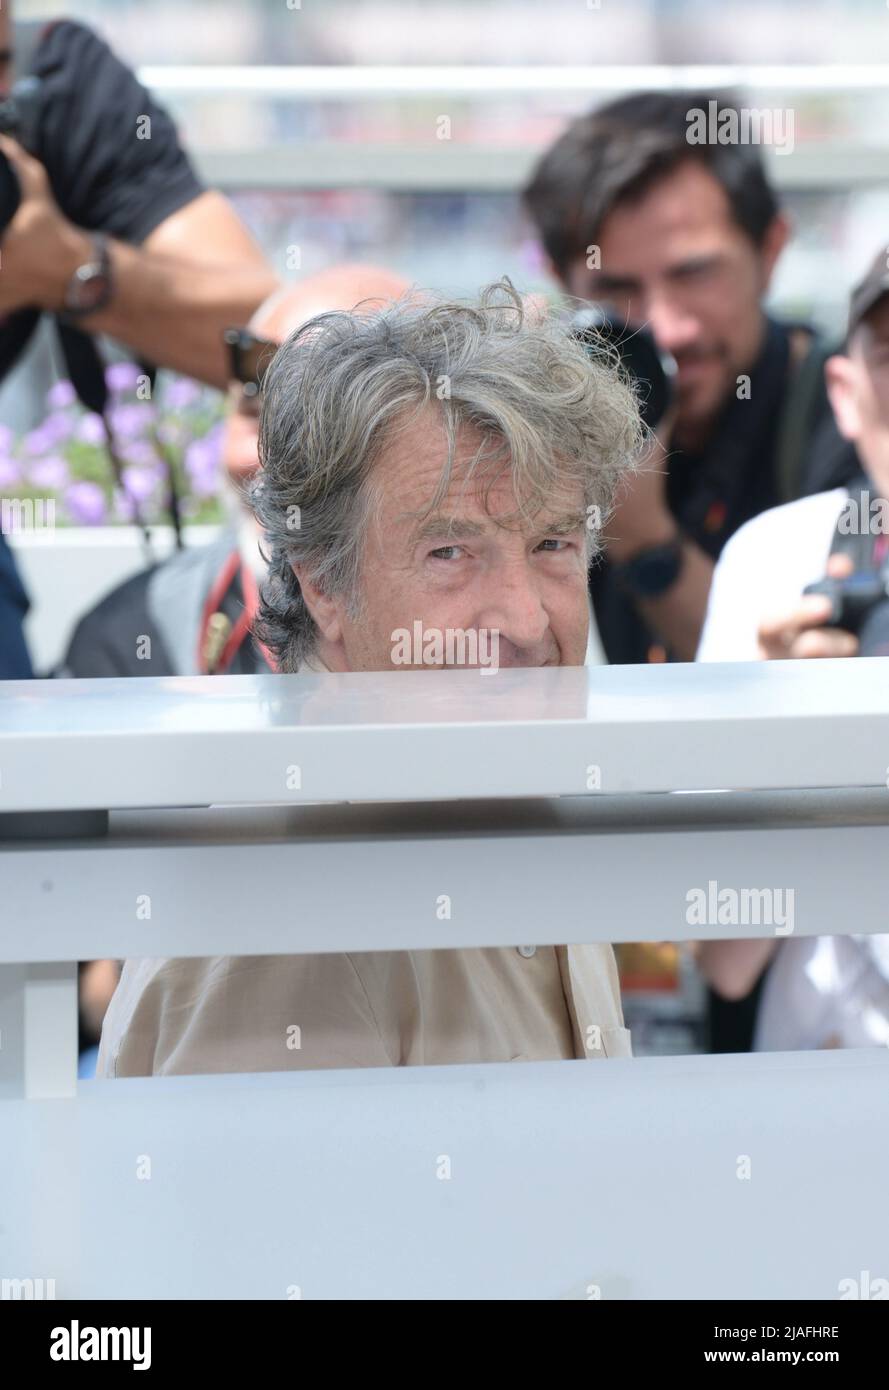 May 28, 2022, CANNES, France: CANNES, FRANCE - MAY 28: FranÃ§ois Cluzet attends the photocall for ''Mascarade'' during the 75th annual Cannes film festival at Palais des Festivals on May 28, 2022 in Cannes, France. (Credit Image: © Frederick Injimbert/ZUMA Press Wire) Stock Photo